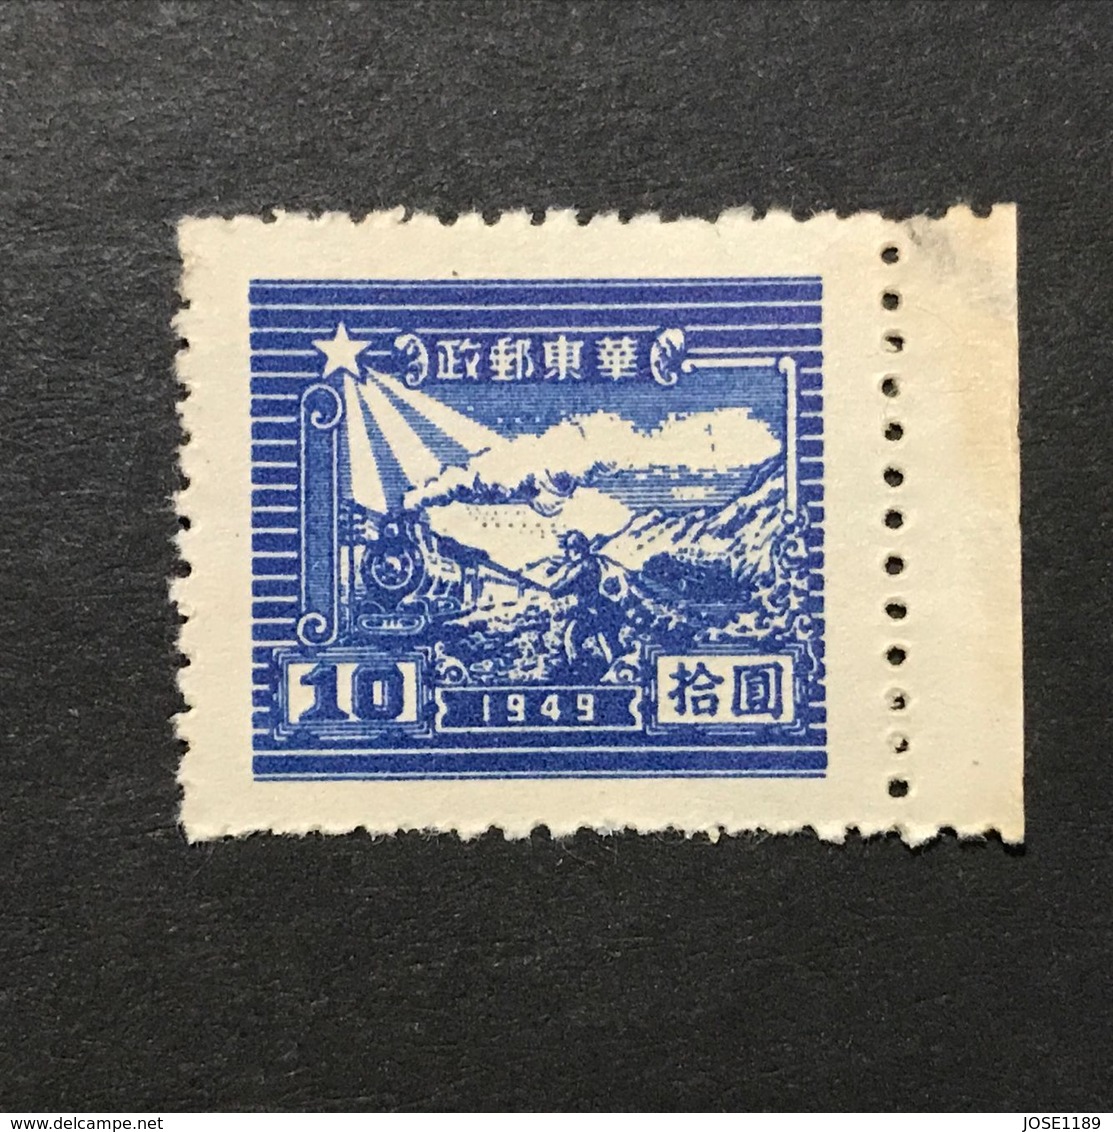 ◆◆◆CHINA 1949   2nd  Print Traffic Means Design Issue   $10   NEW  AA6479 - China Oriental 1949-50